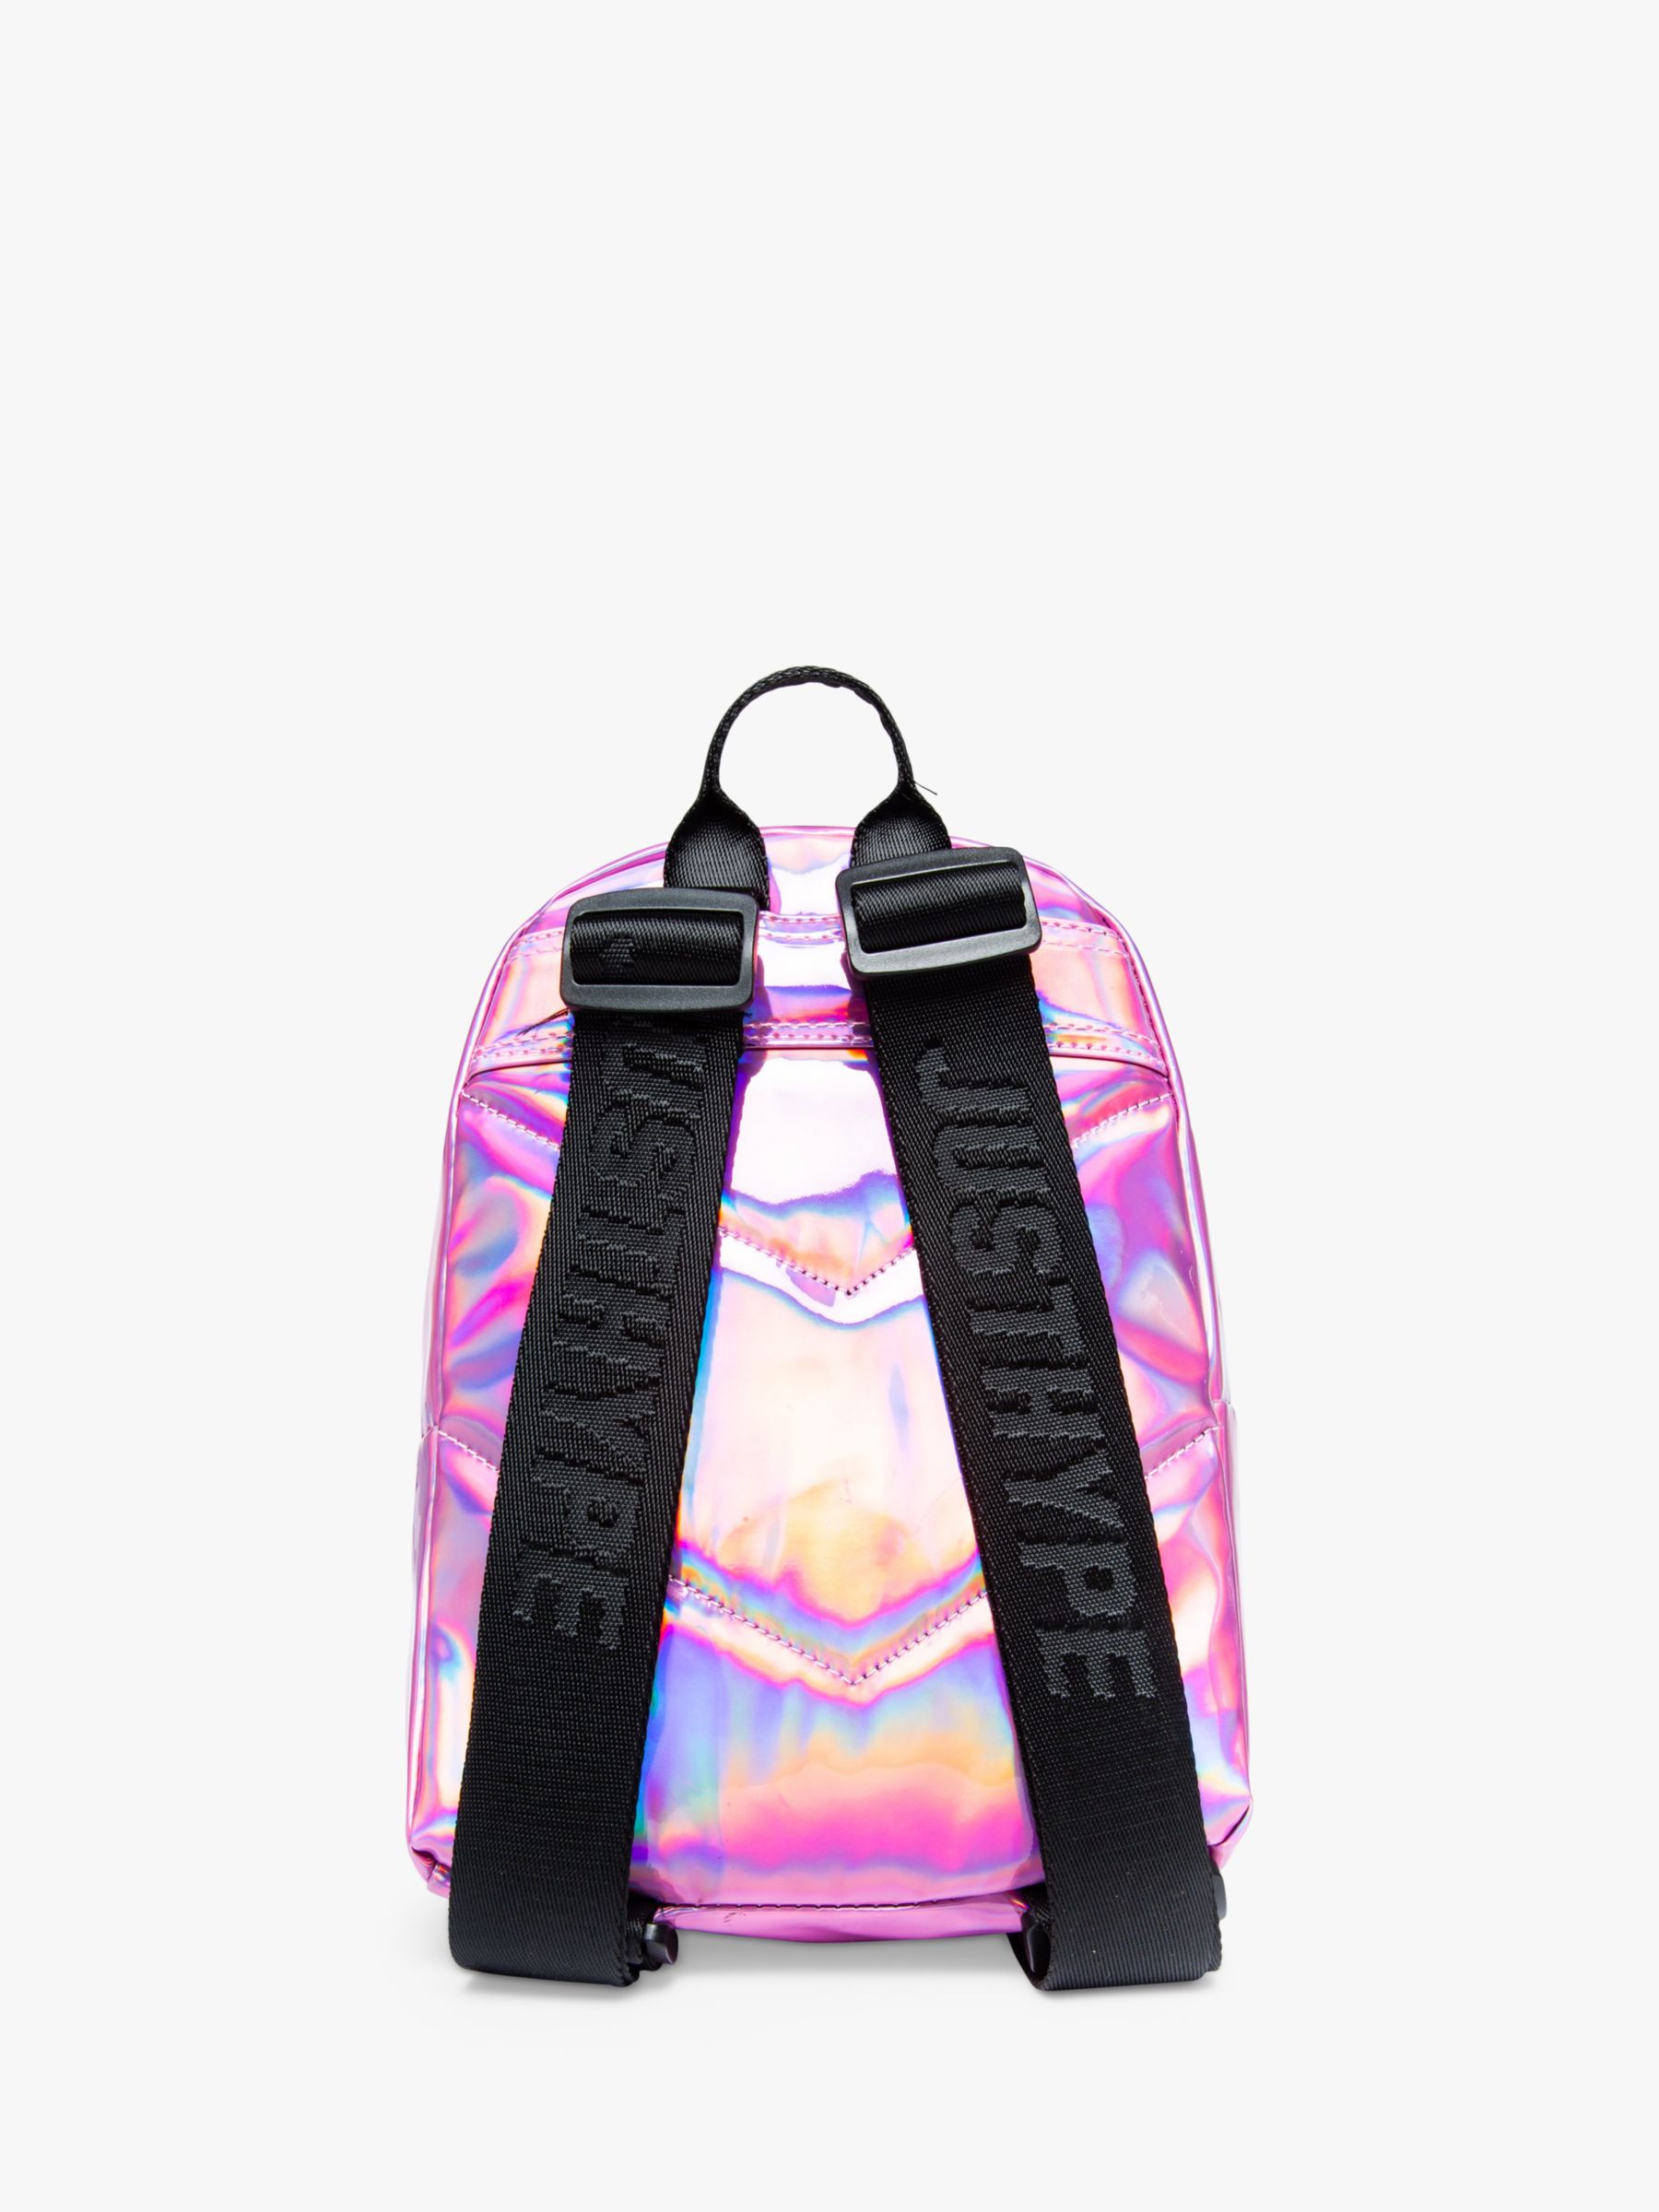 Holographic backpack with colour change in light